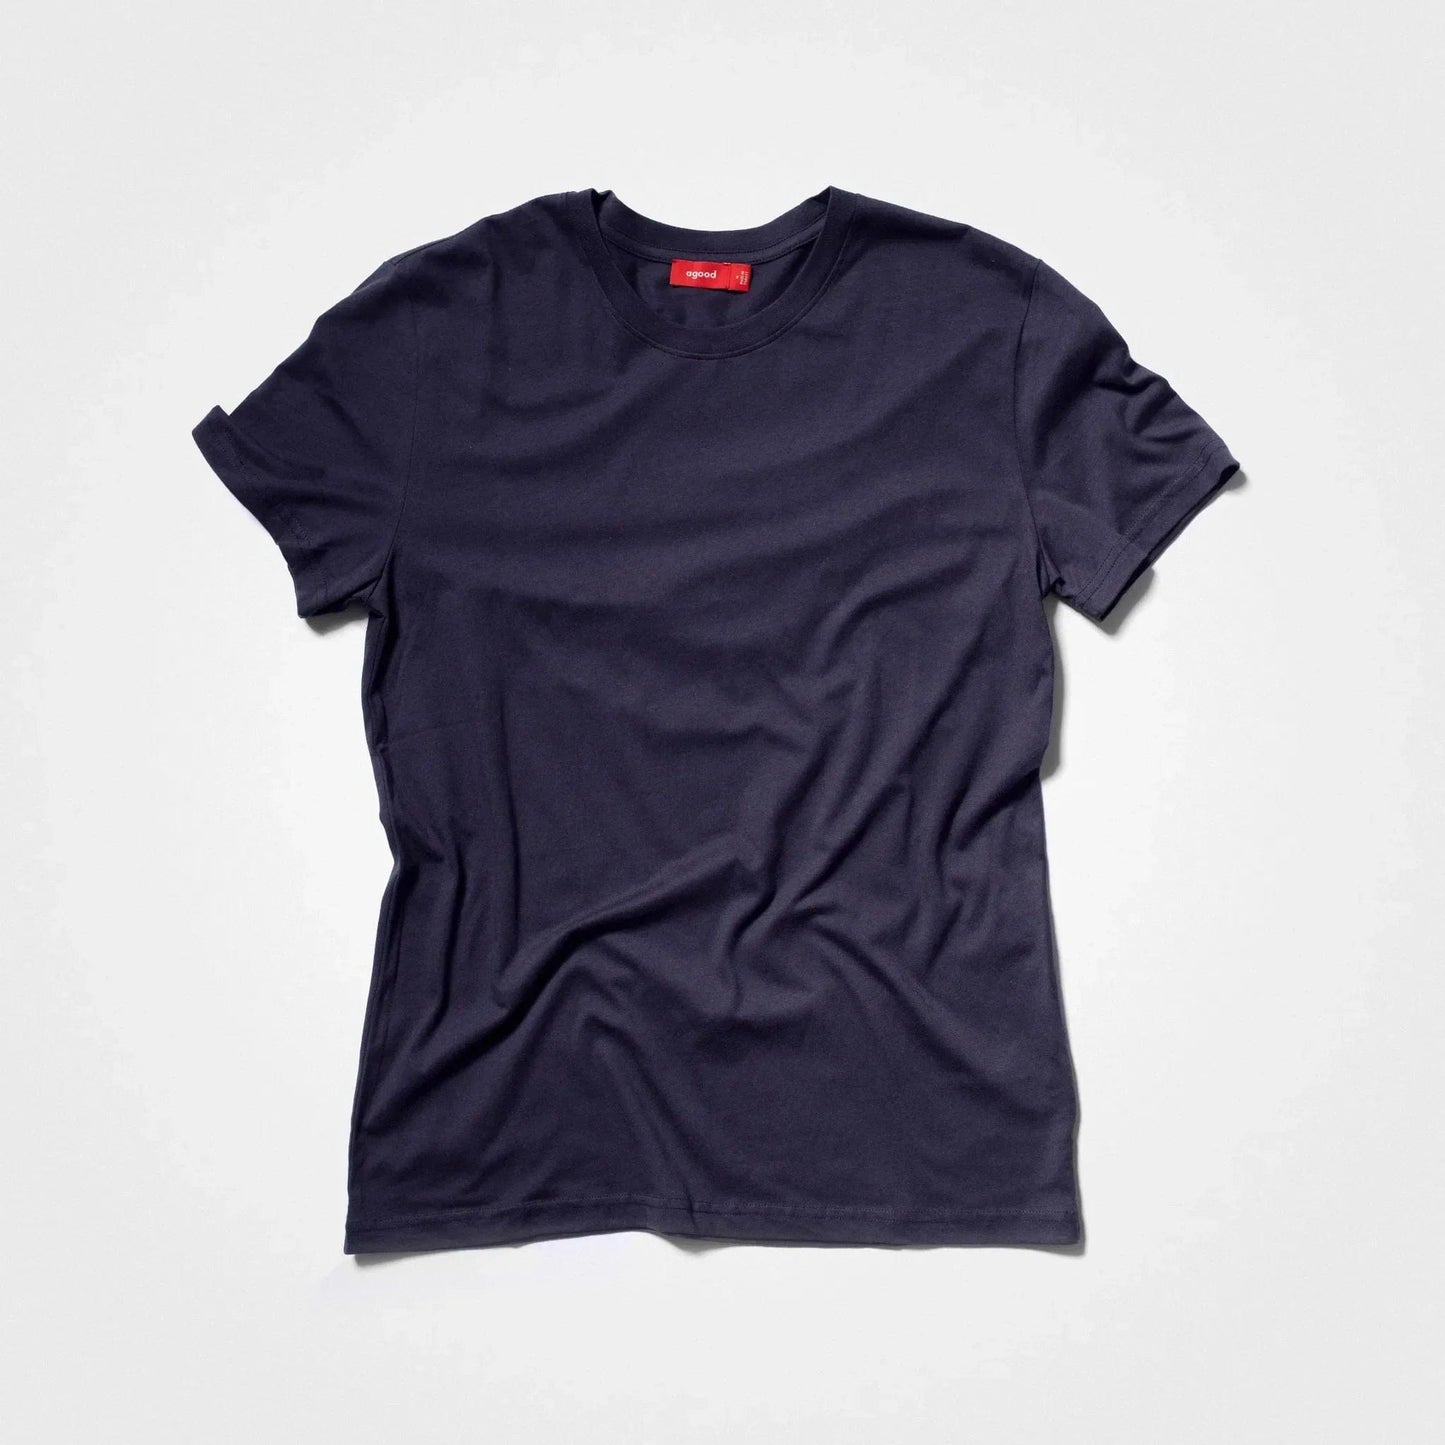 5 Pack | Men’s T-Shirts, Recycled Cotton, Midnight